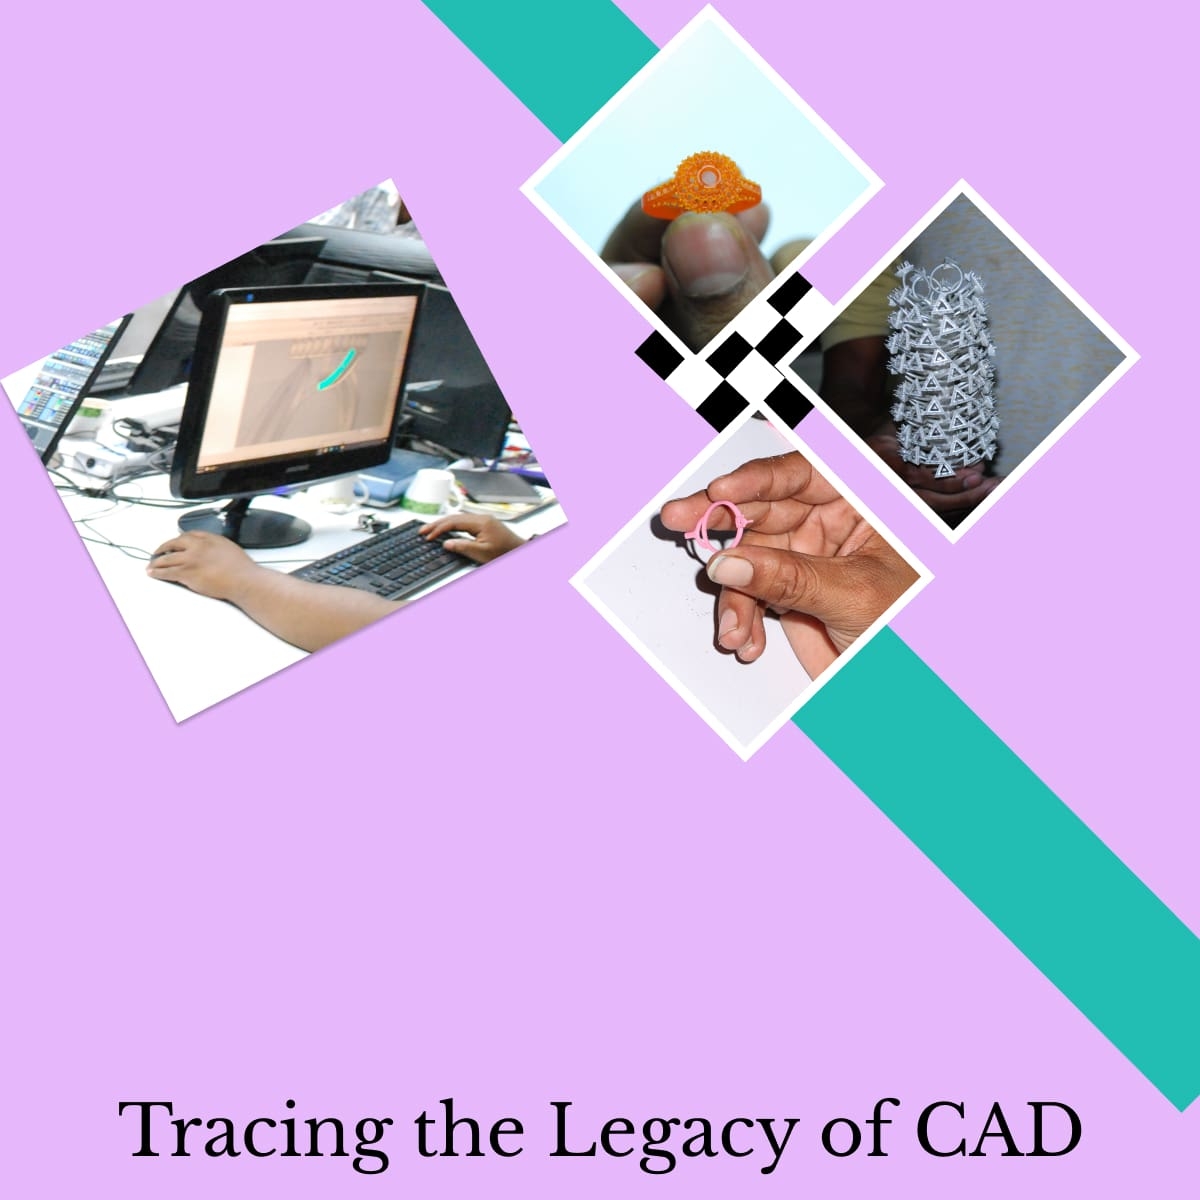 History of CAD